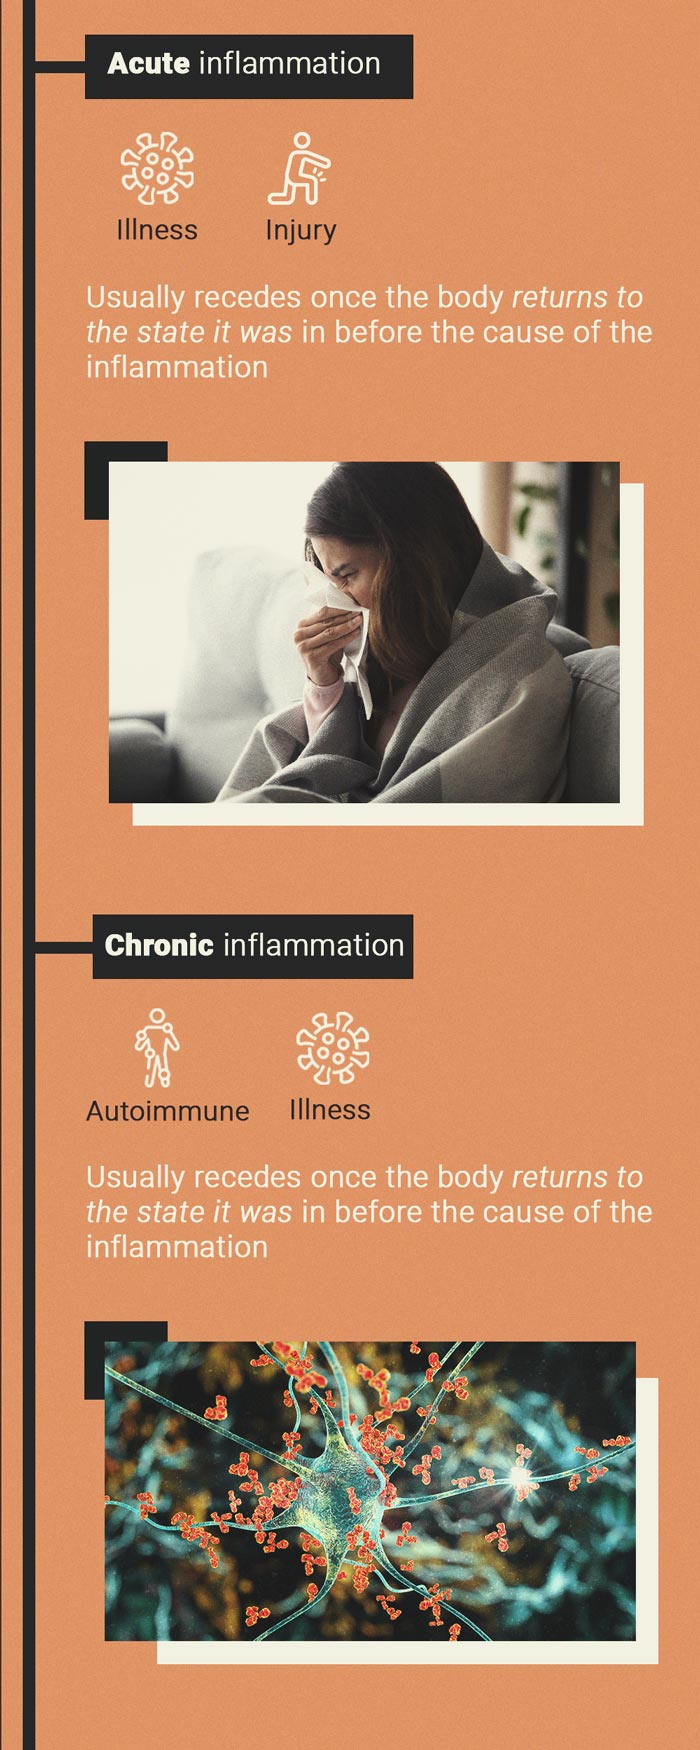 What Is Inflammation?